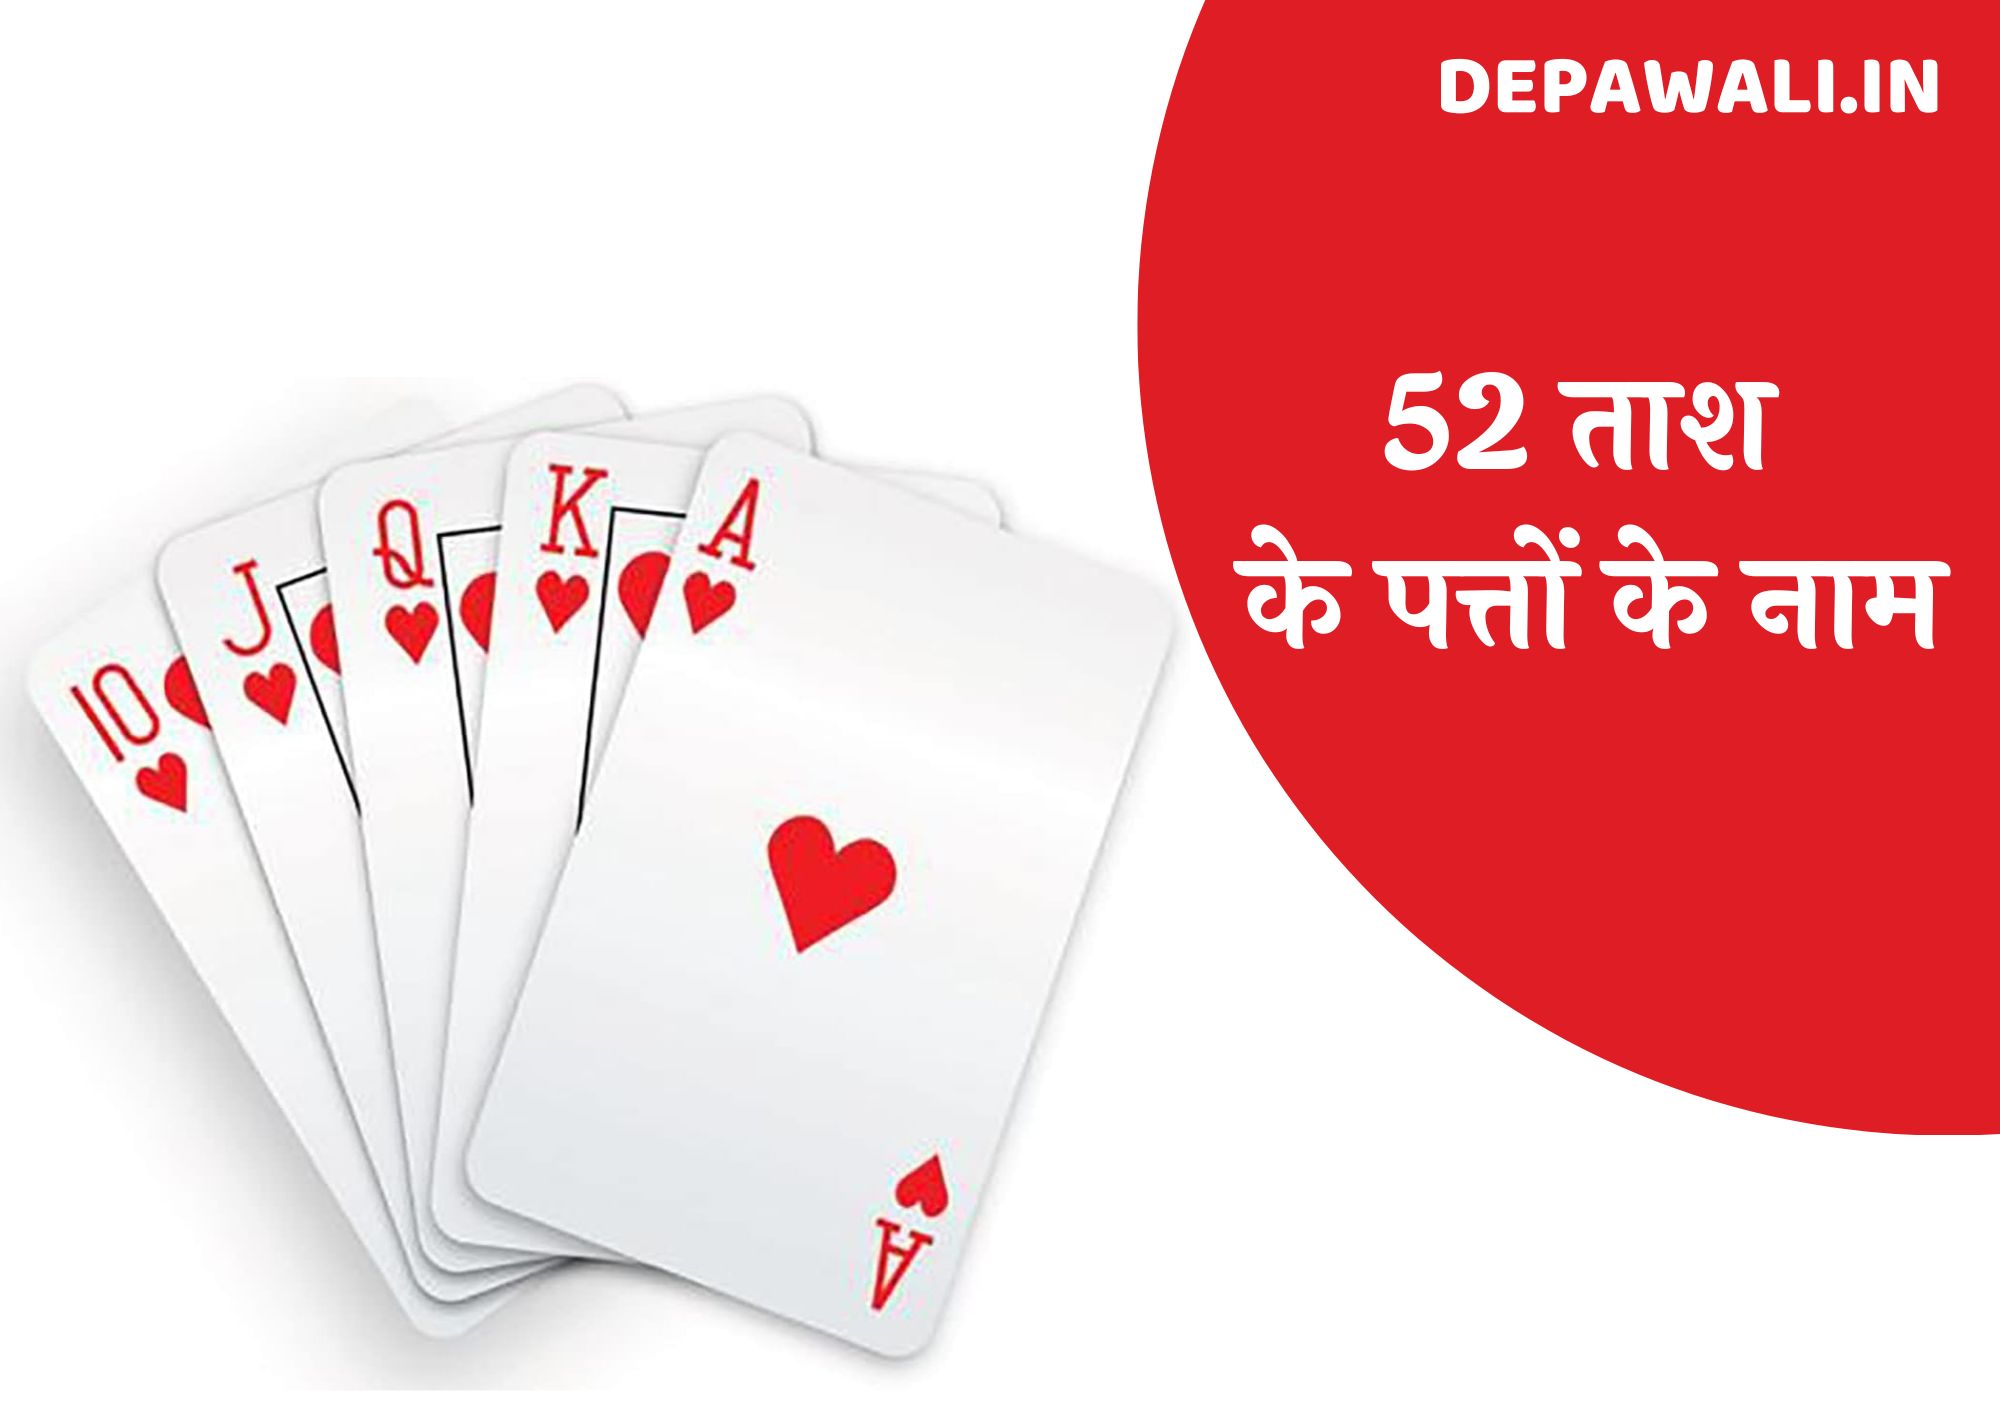 52 ताश के पत्तों के नाम (ताश के 52 पत्ते) - Names Of 52 Playing Cards In Hindi And English - 52 Playing Cards Names In Hindi And English